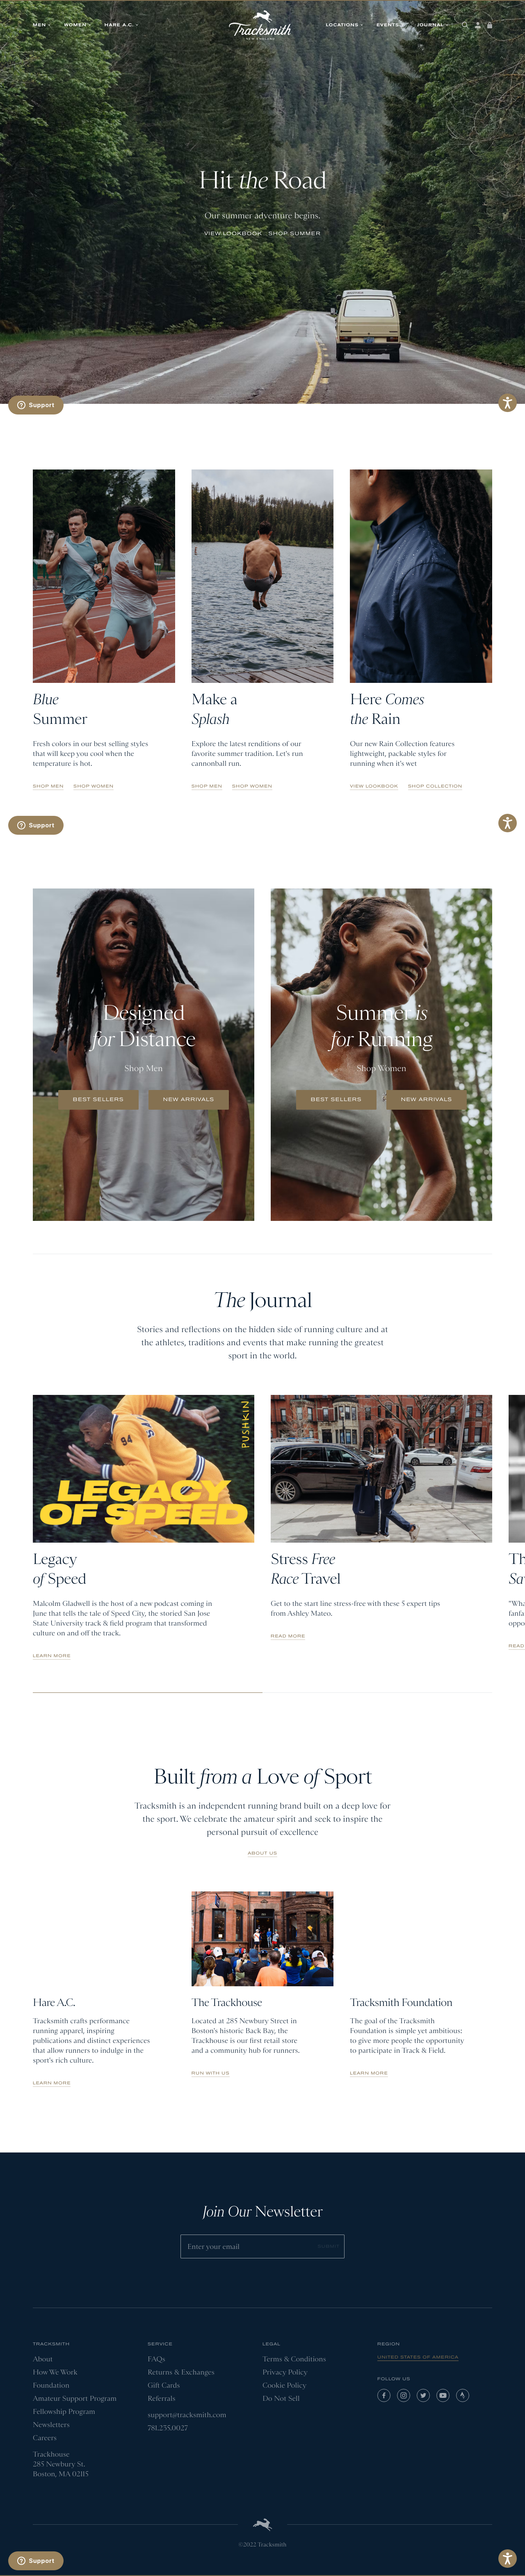 ecommerce landing page example of Performance Running Gear, Apparel, and Accessories | Tracksmith